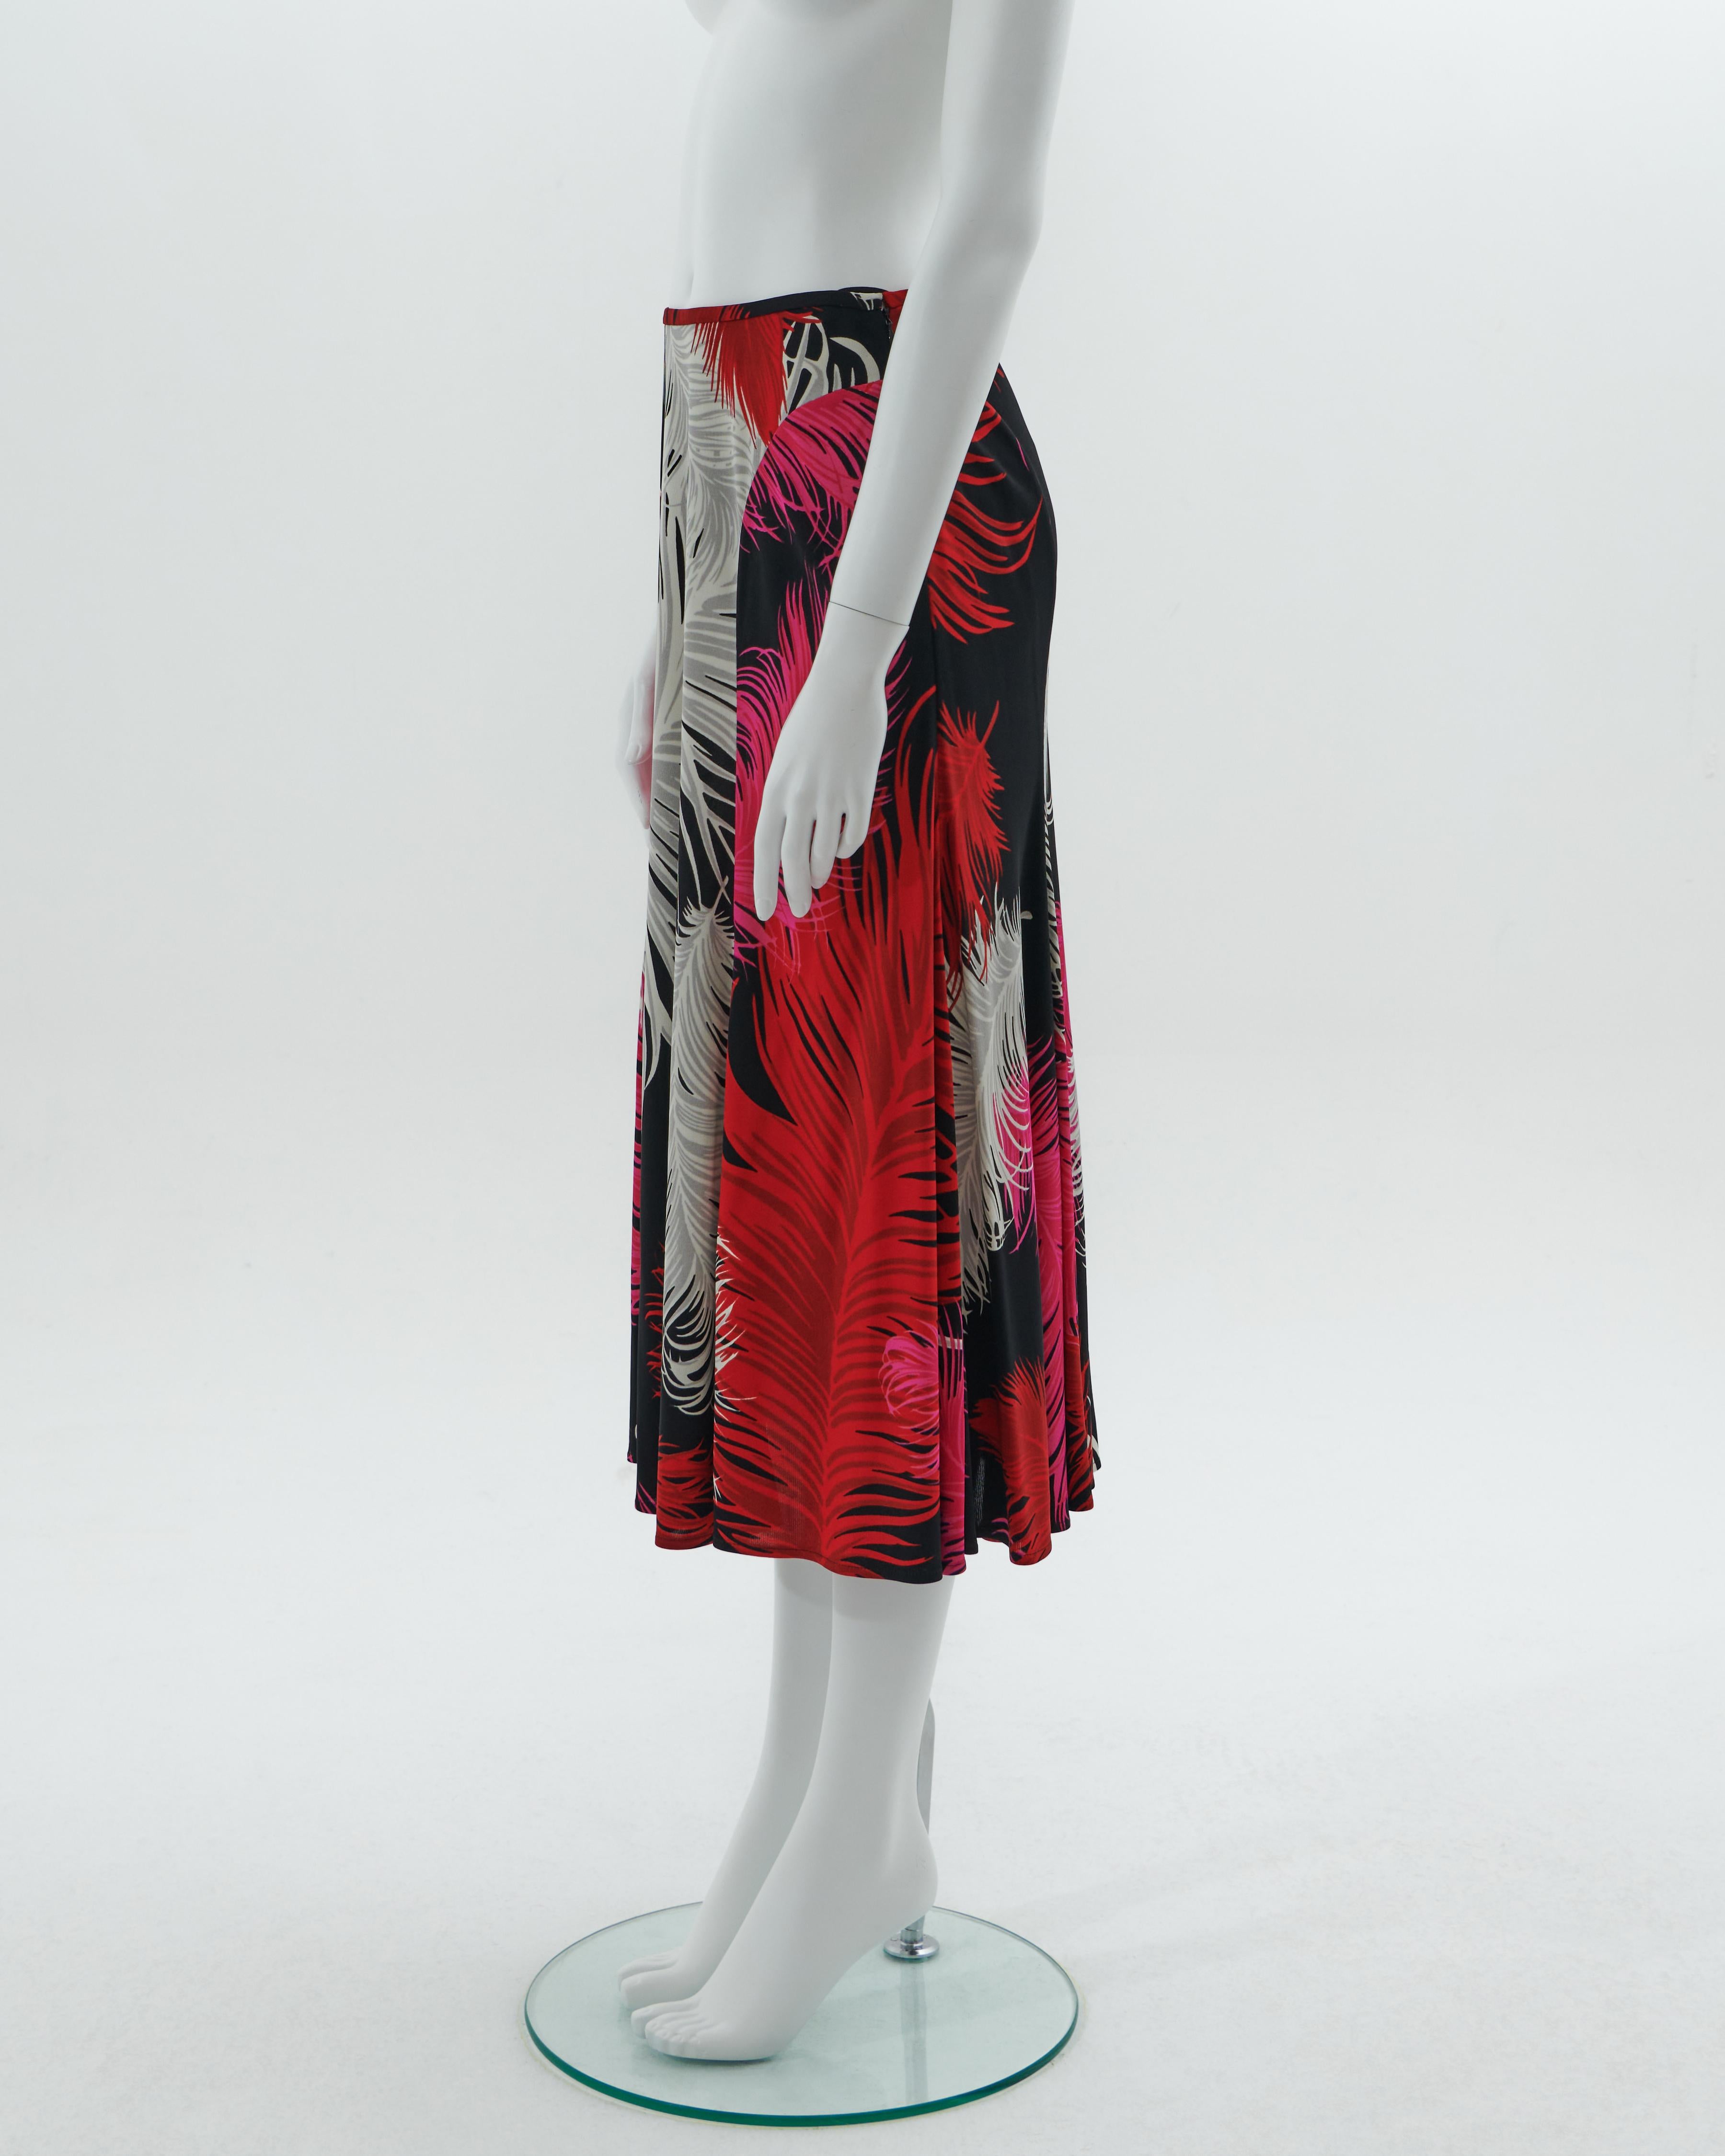 - Designed by Donatella Versace 
- Sold by Skof.Archive
- Fall Winter 2001
- Gianni Versace Couture in a bright pink, red, white and grey feather print
- Draped skirt lined with black fabric
- Long draped skirt
- Made in Italy

Condition: